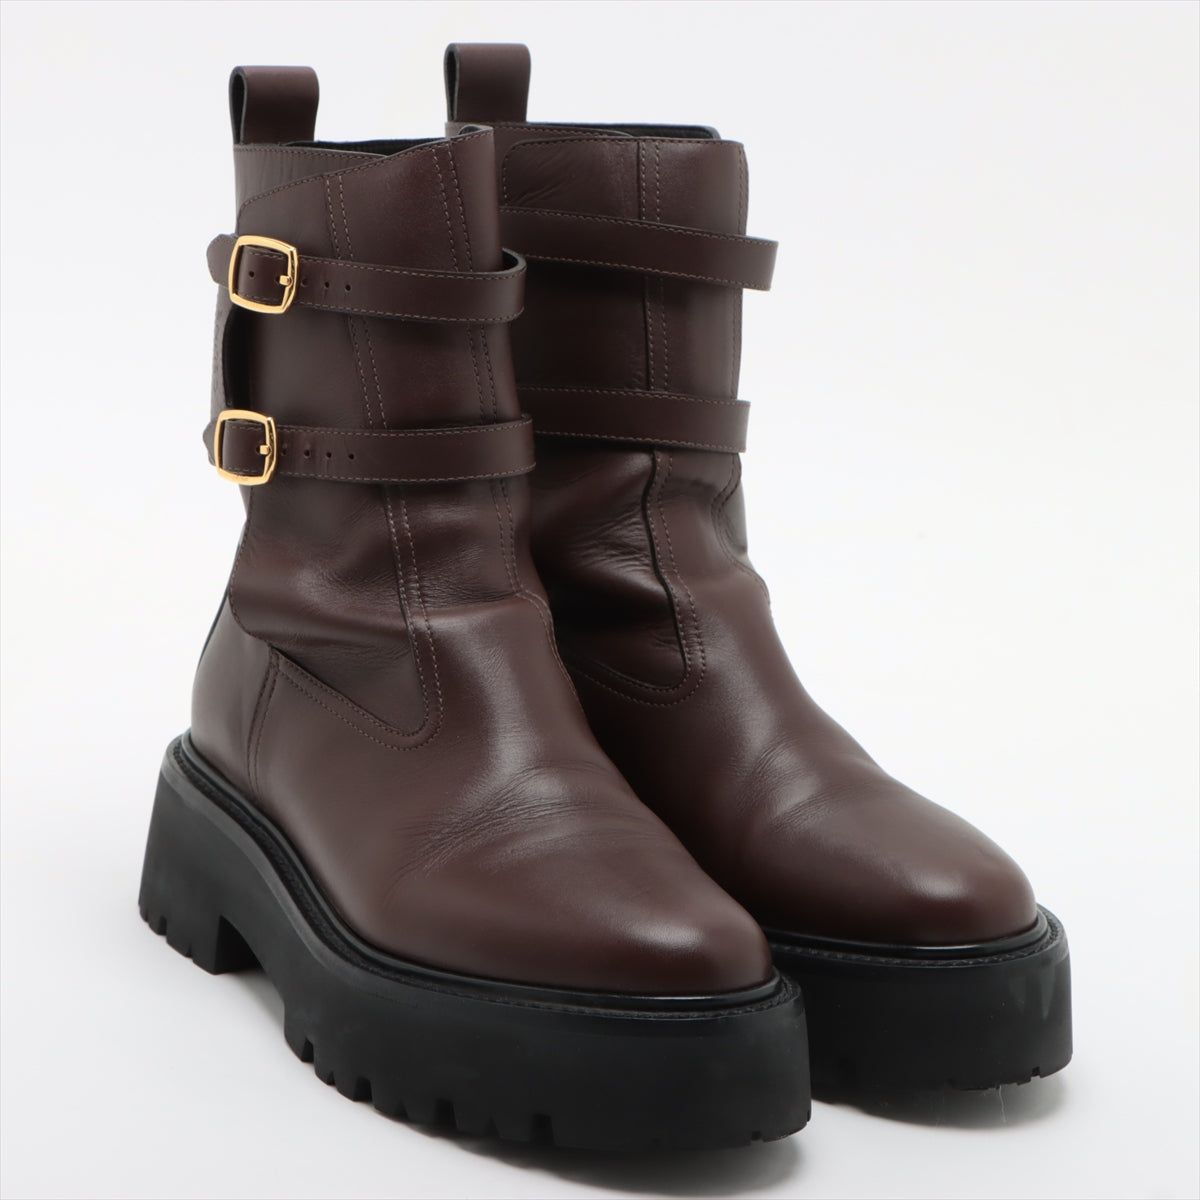 CELINE Leather Short Boots 39 Ladies' Brown box There is a bag